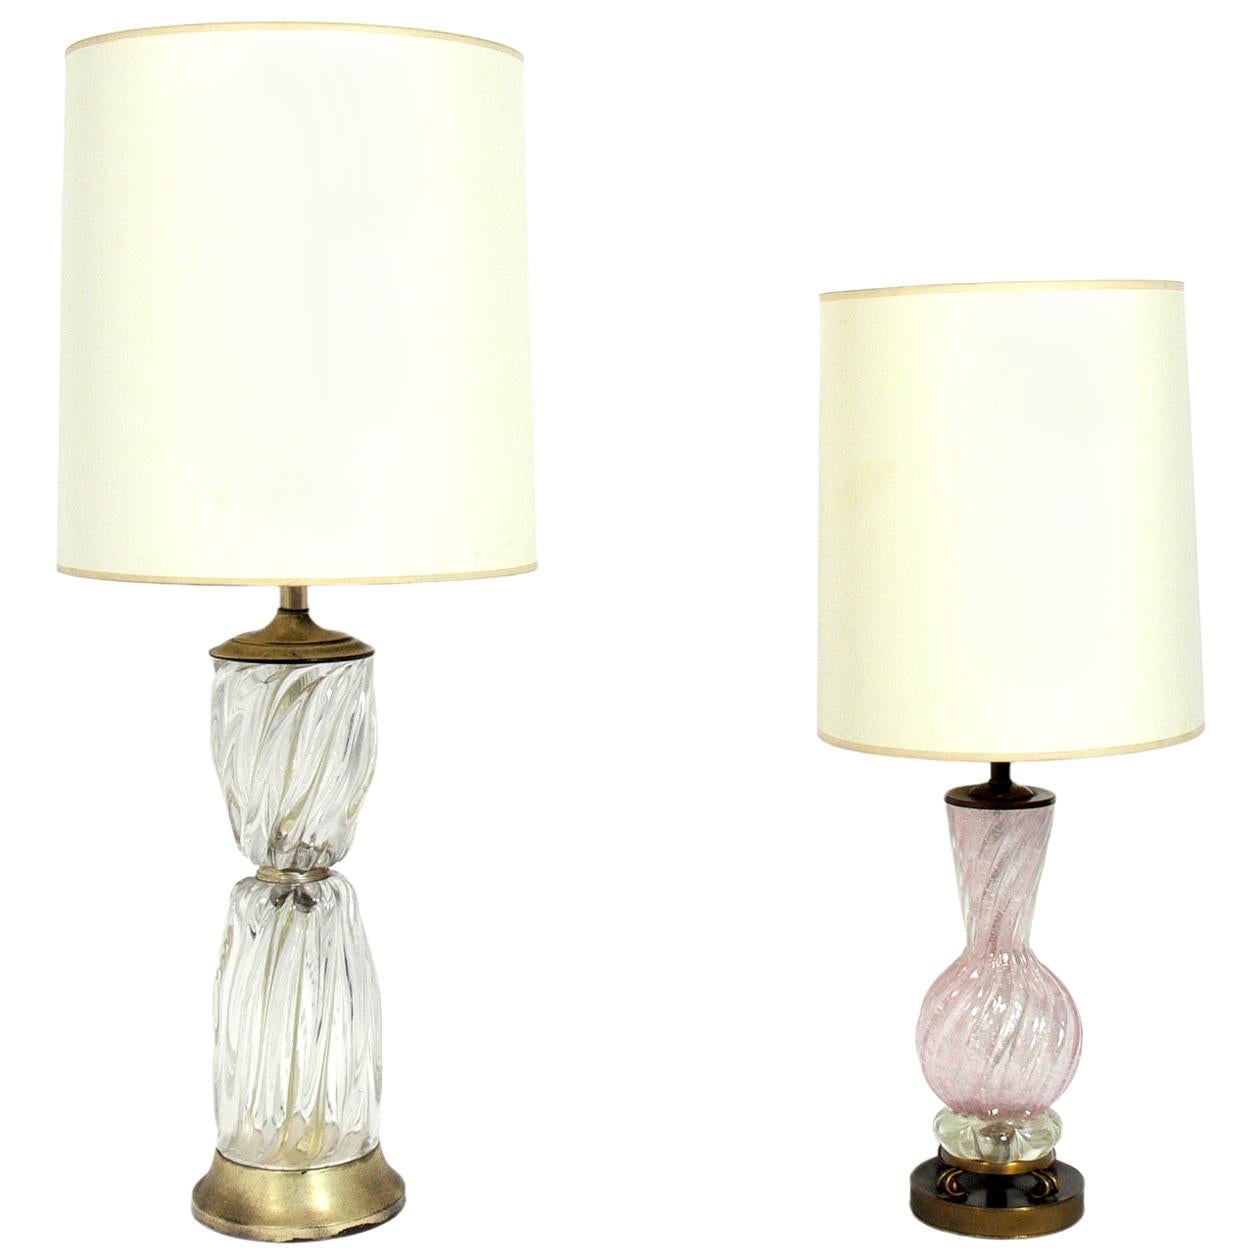 Selection of Barovier & Toso Murano Glass Lamps